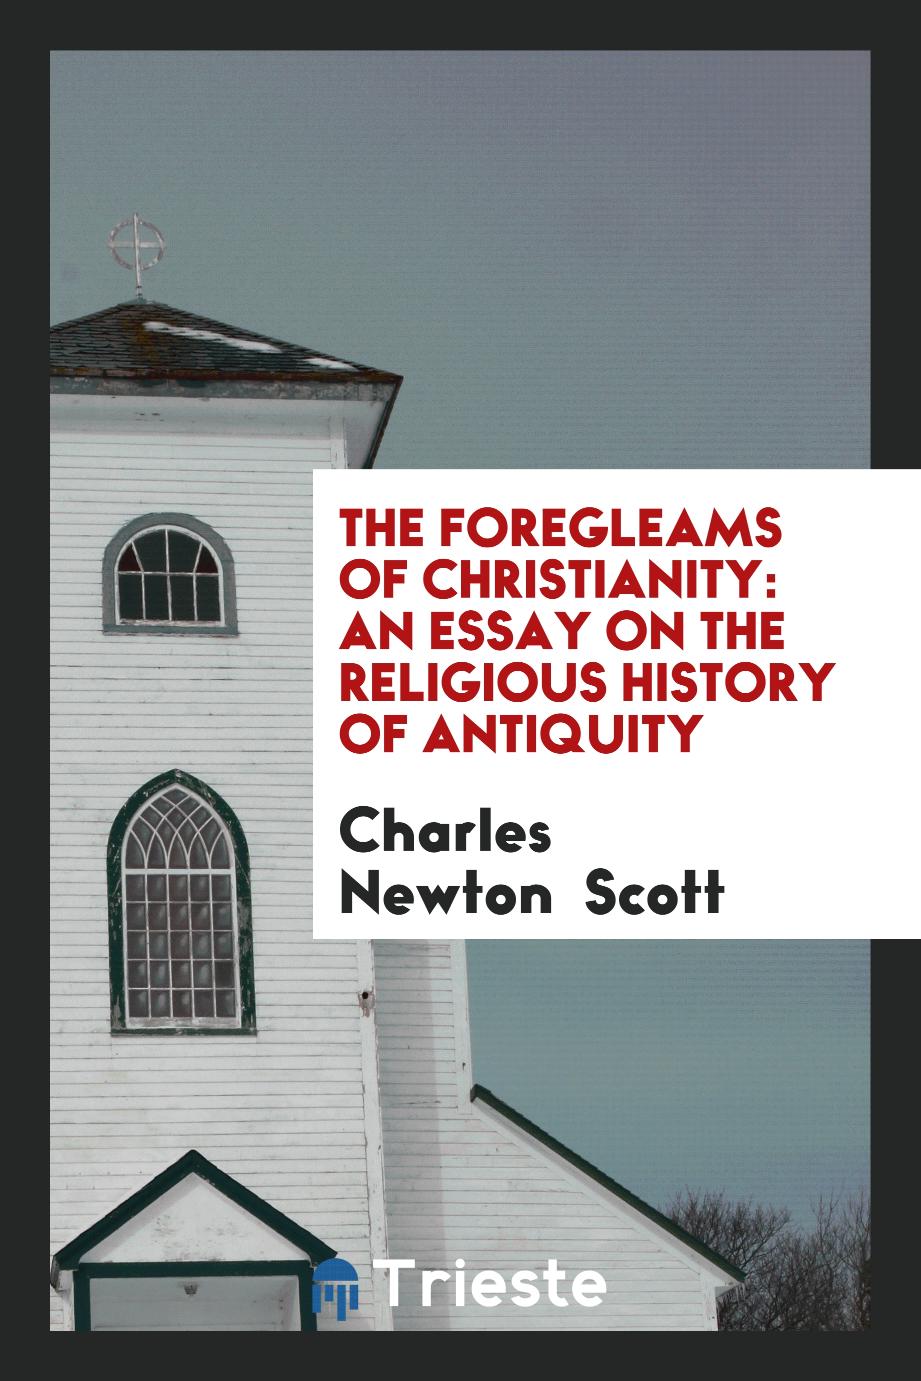 The Foregleams of Christianity: An Essay on the Religious History of Antiquity